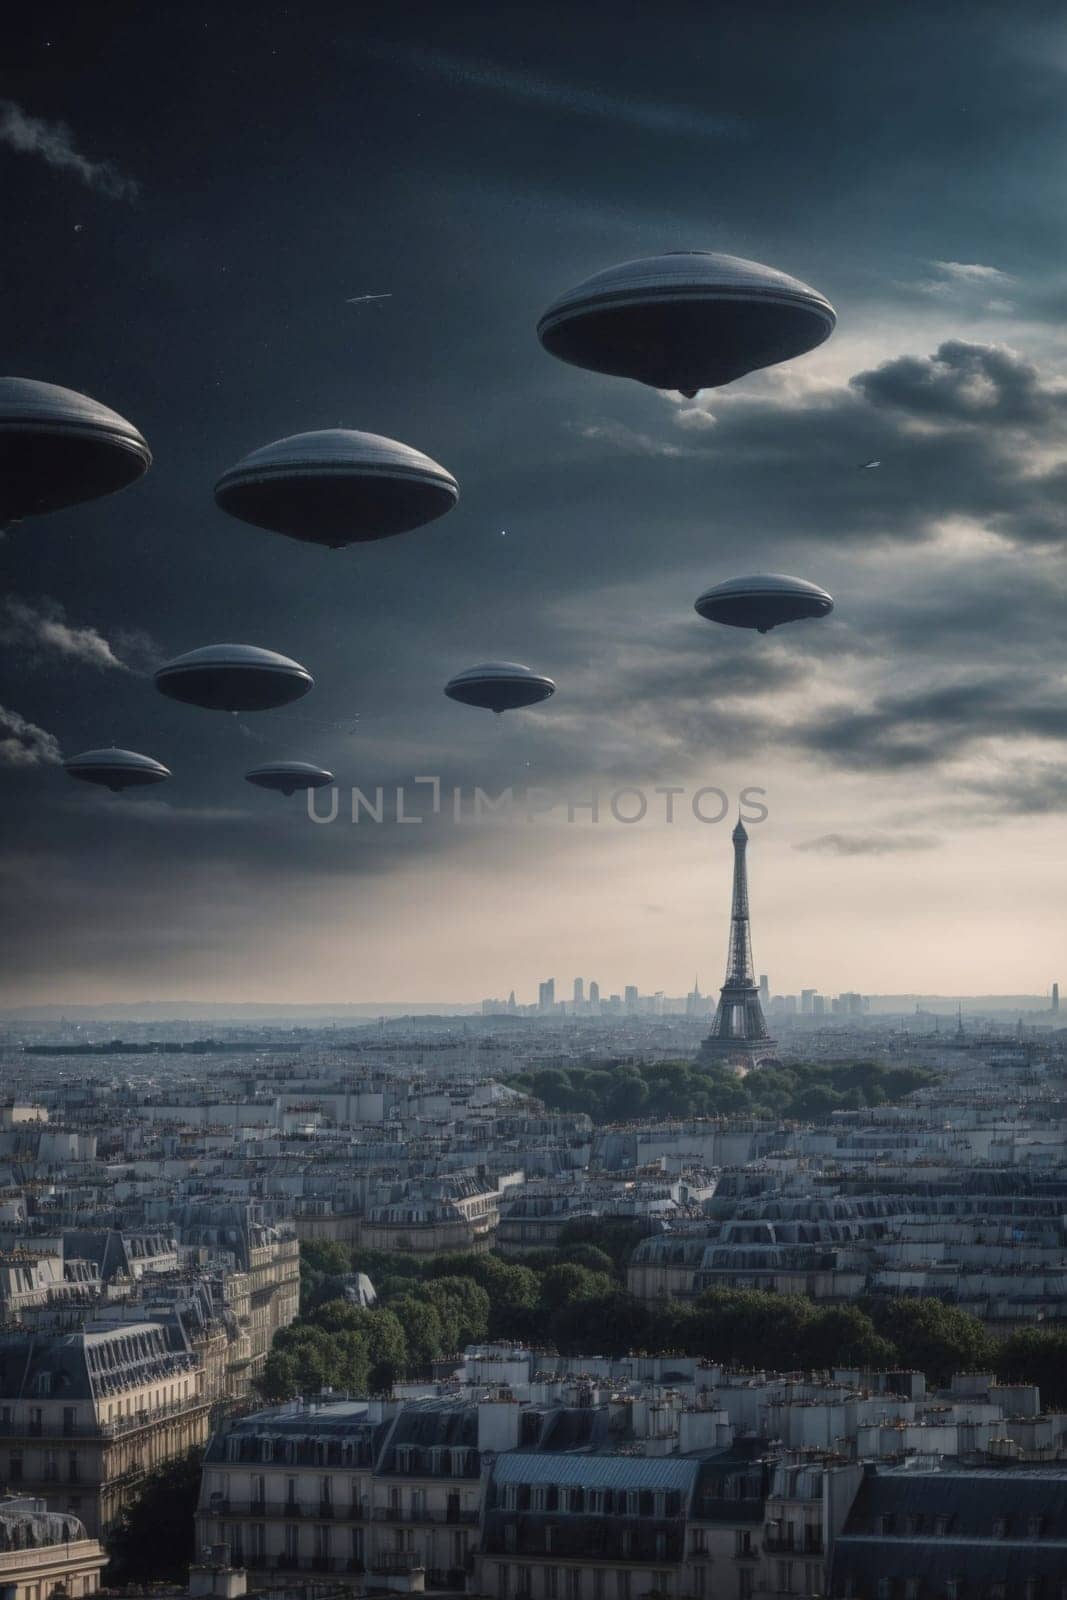 A group of flying saucers hovers above the city of Paris, casting a futuristic glow on the iconic landmarks below.